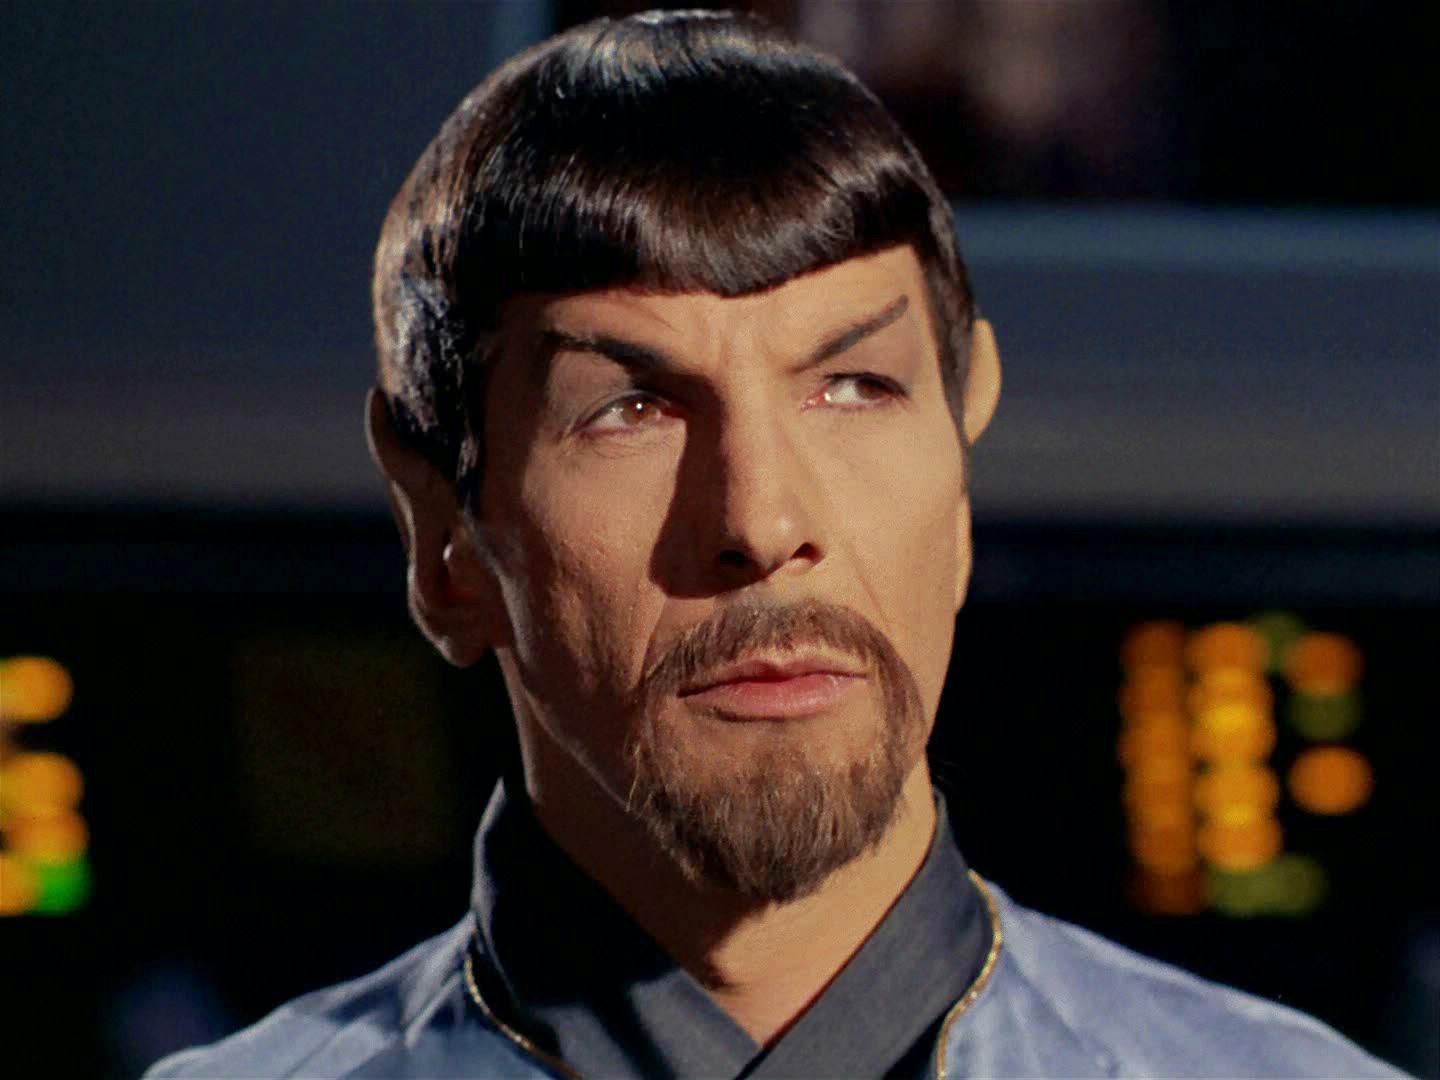 Spock with a goatee